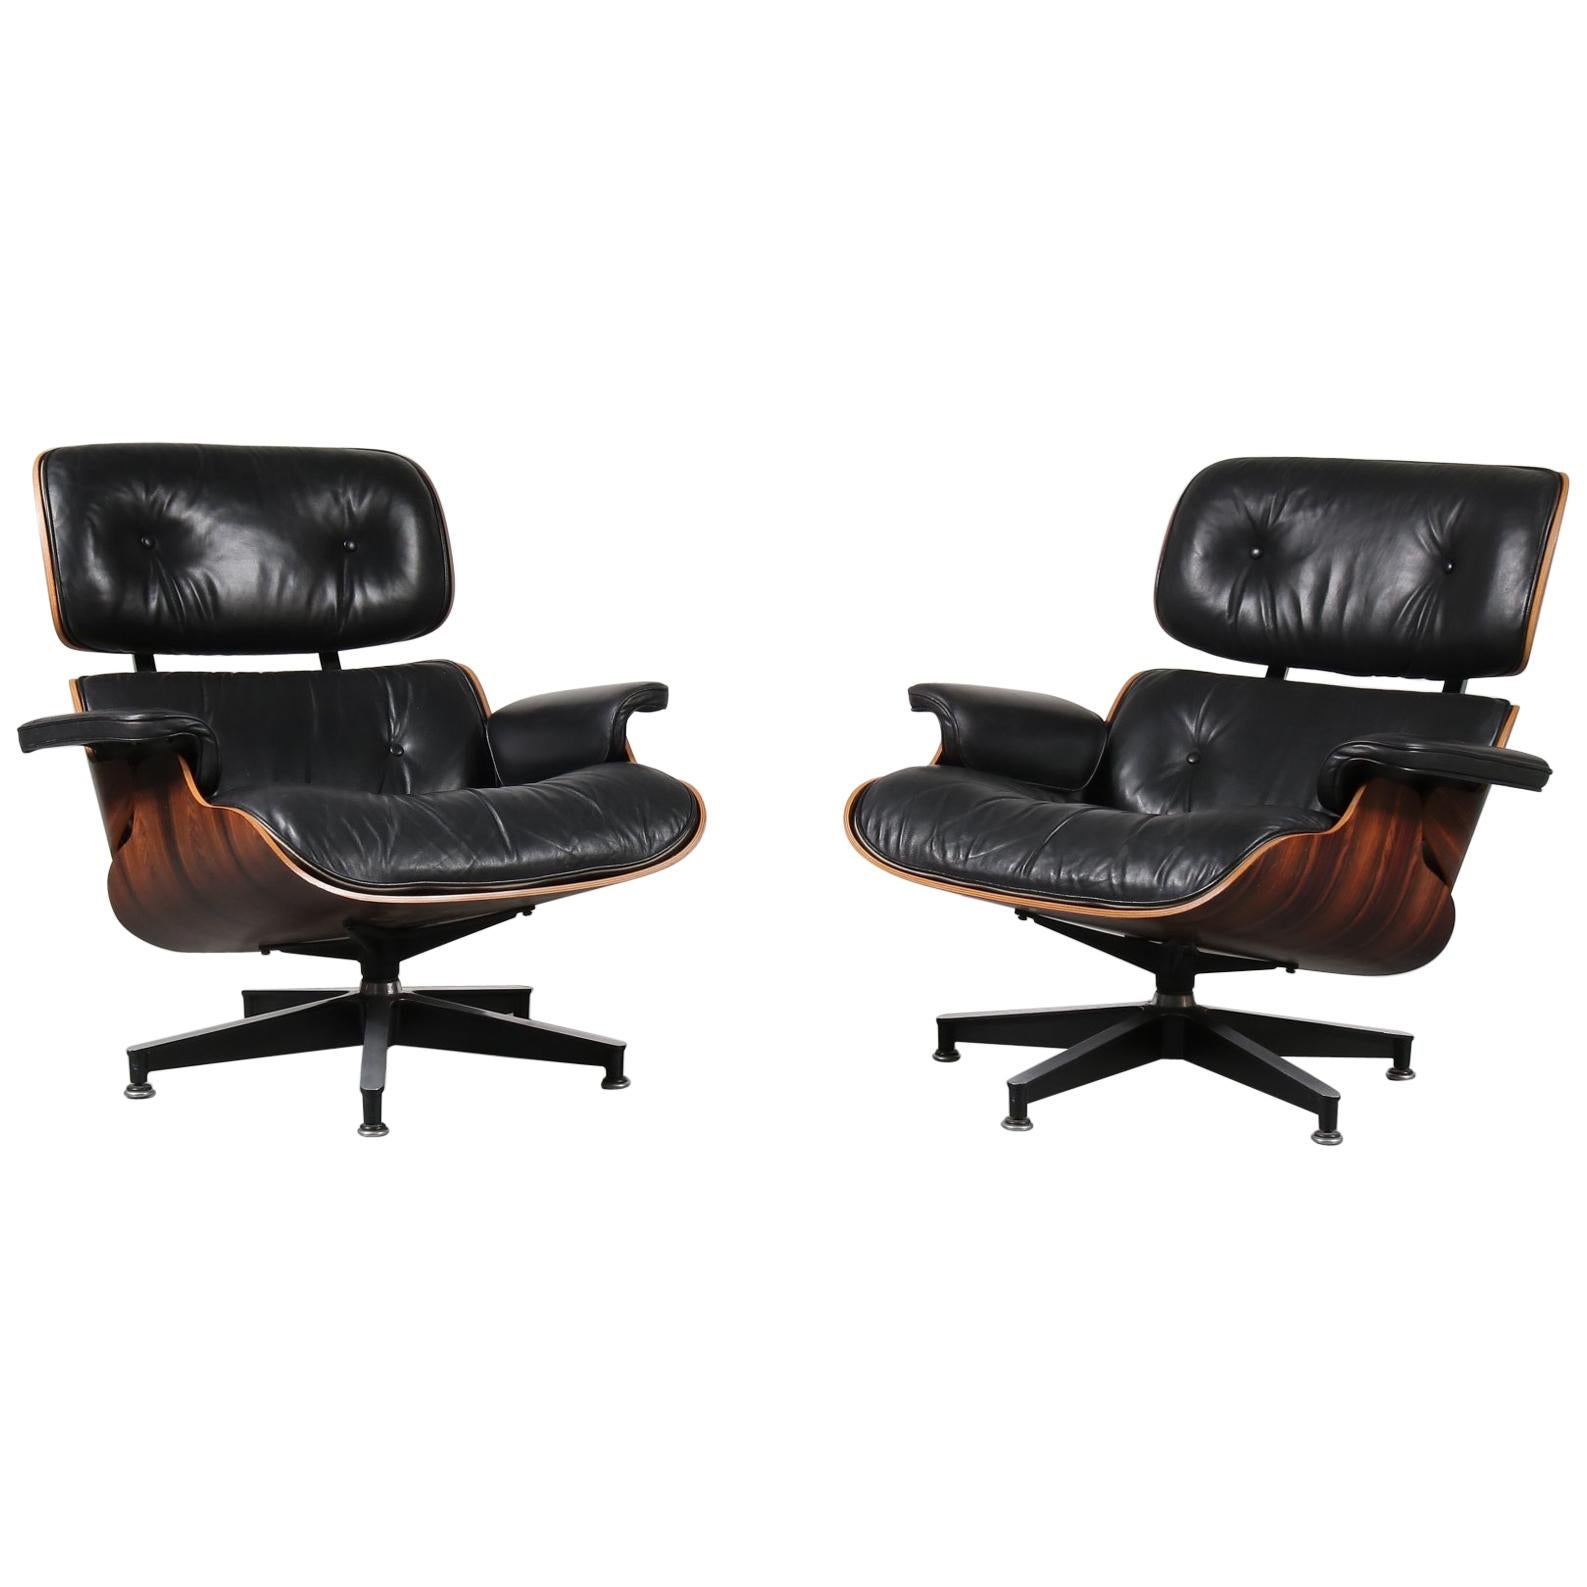 Pair of Charles and Ray Eames Lounge Chairs for Herman Miller, circa 1970